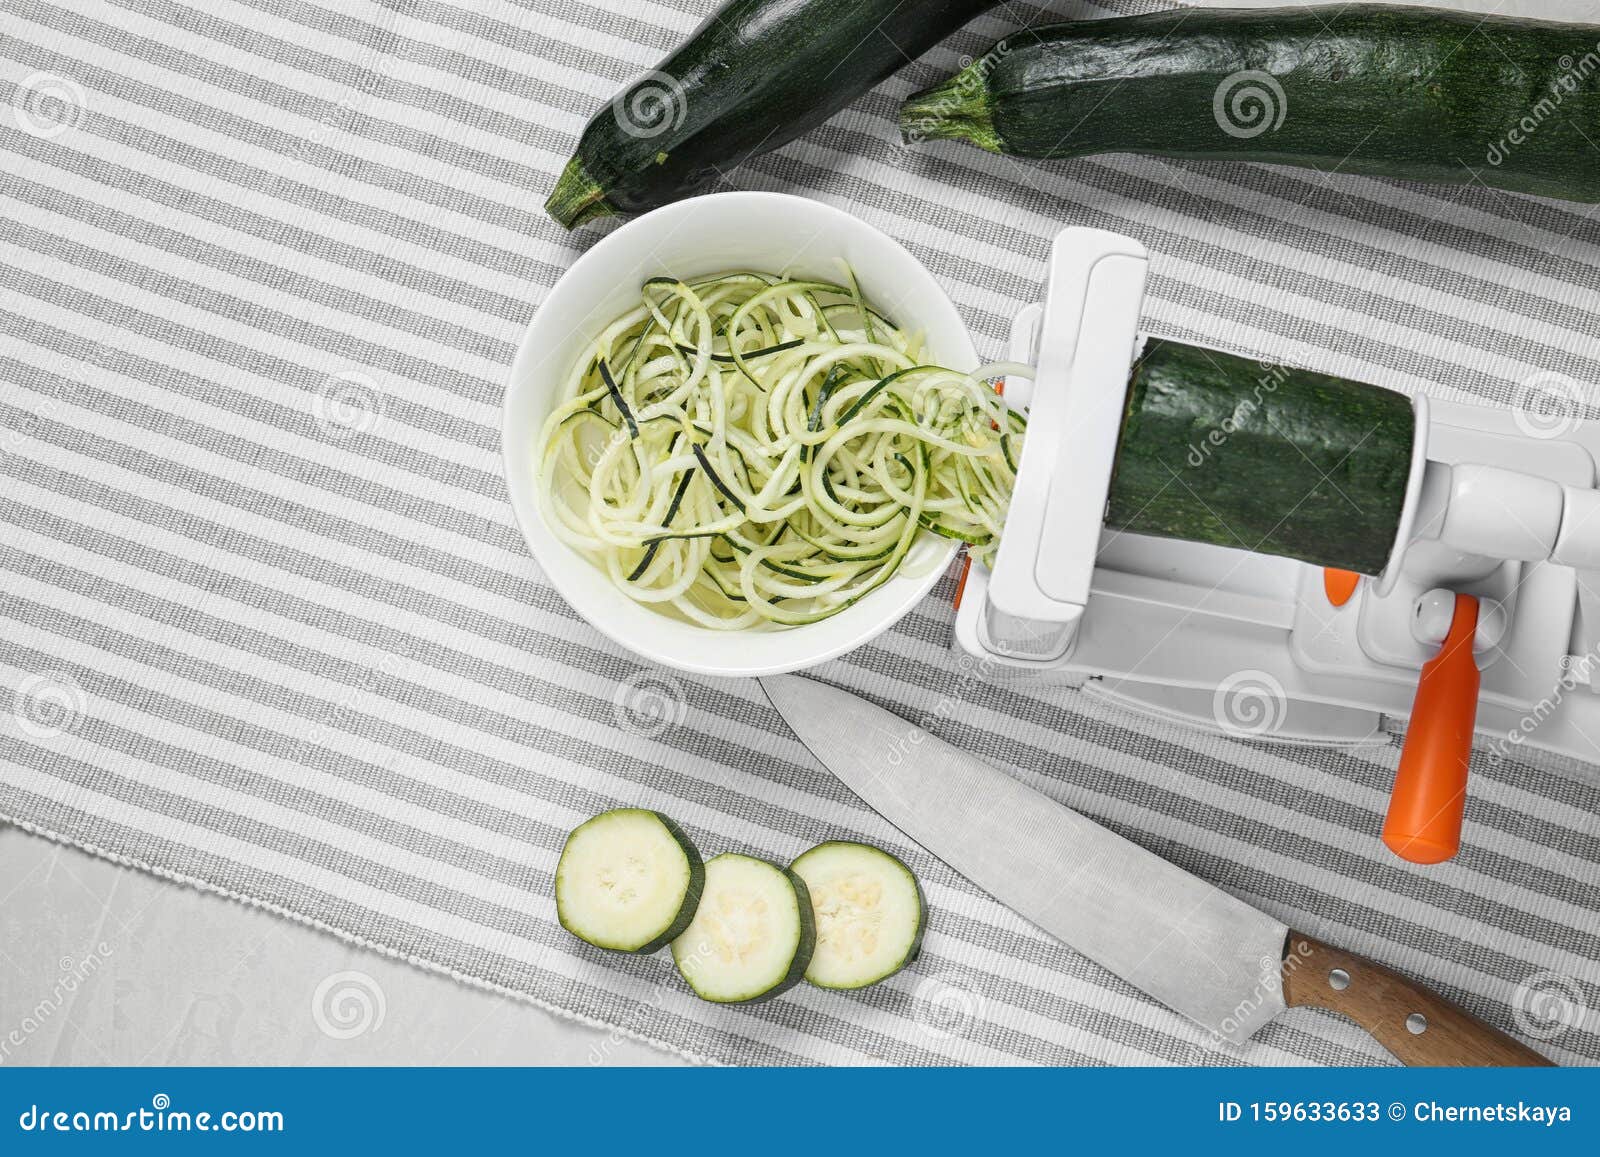 https://thumbs.dreamstime.com/z/making-zucchini-noodles-spiral-slicer-table-flat-lay-159633633.jpg